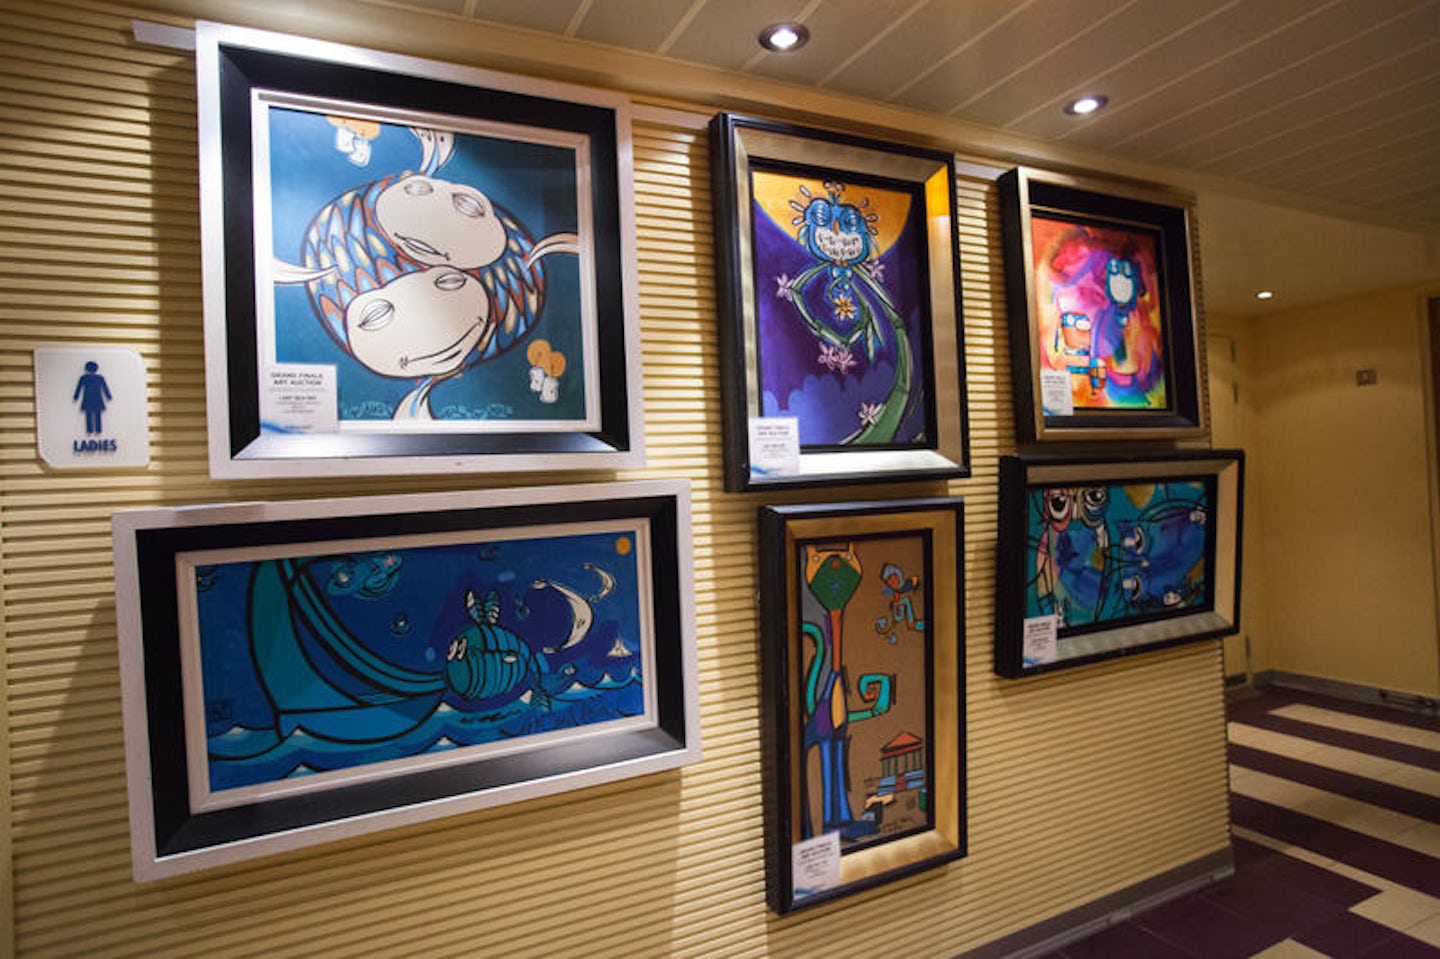 Gallery on the Way on Carnival Breeze